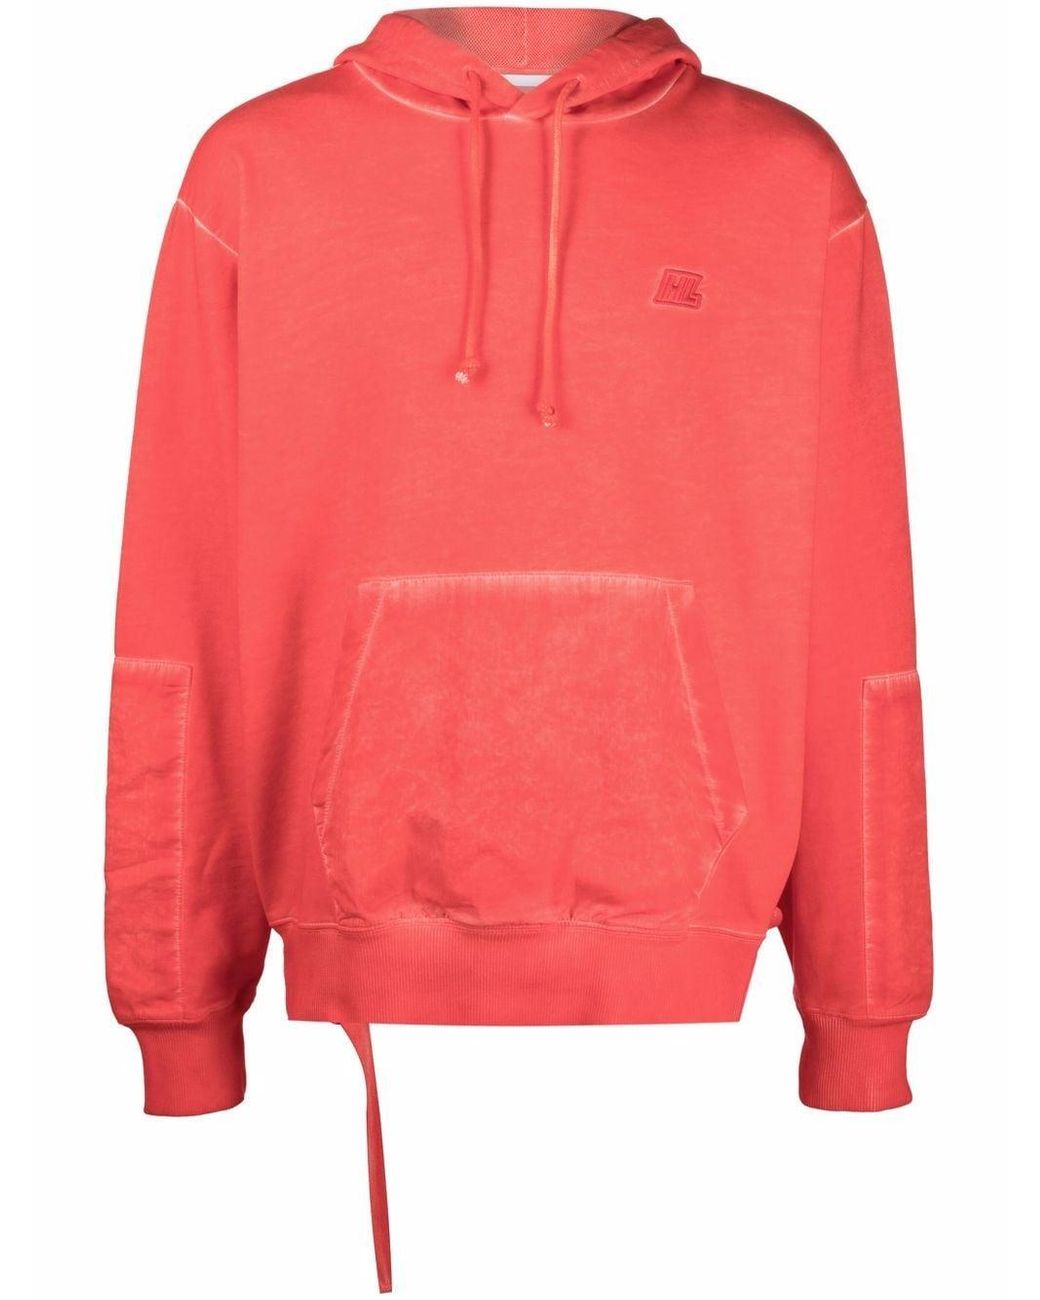 Helmut Lang Cotton Embroidered-logo Hoodie for Men - Lyst